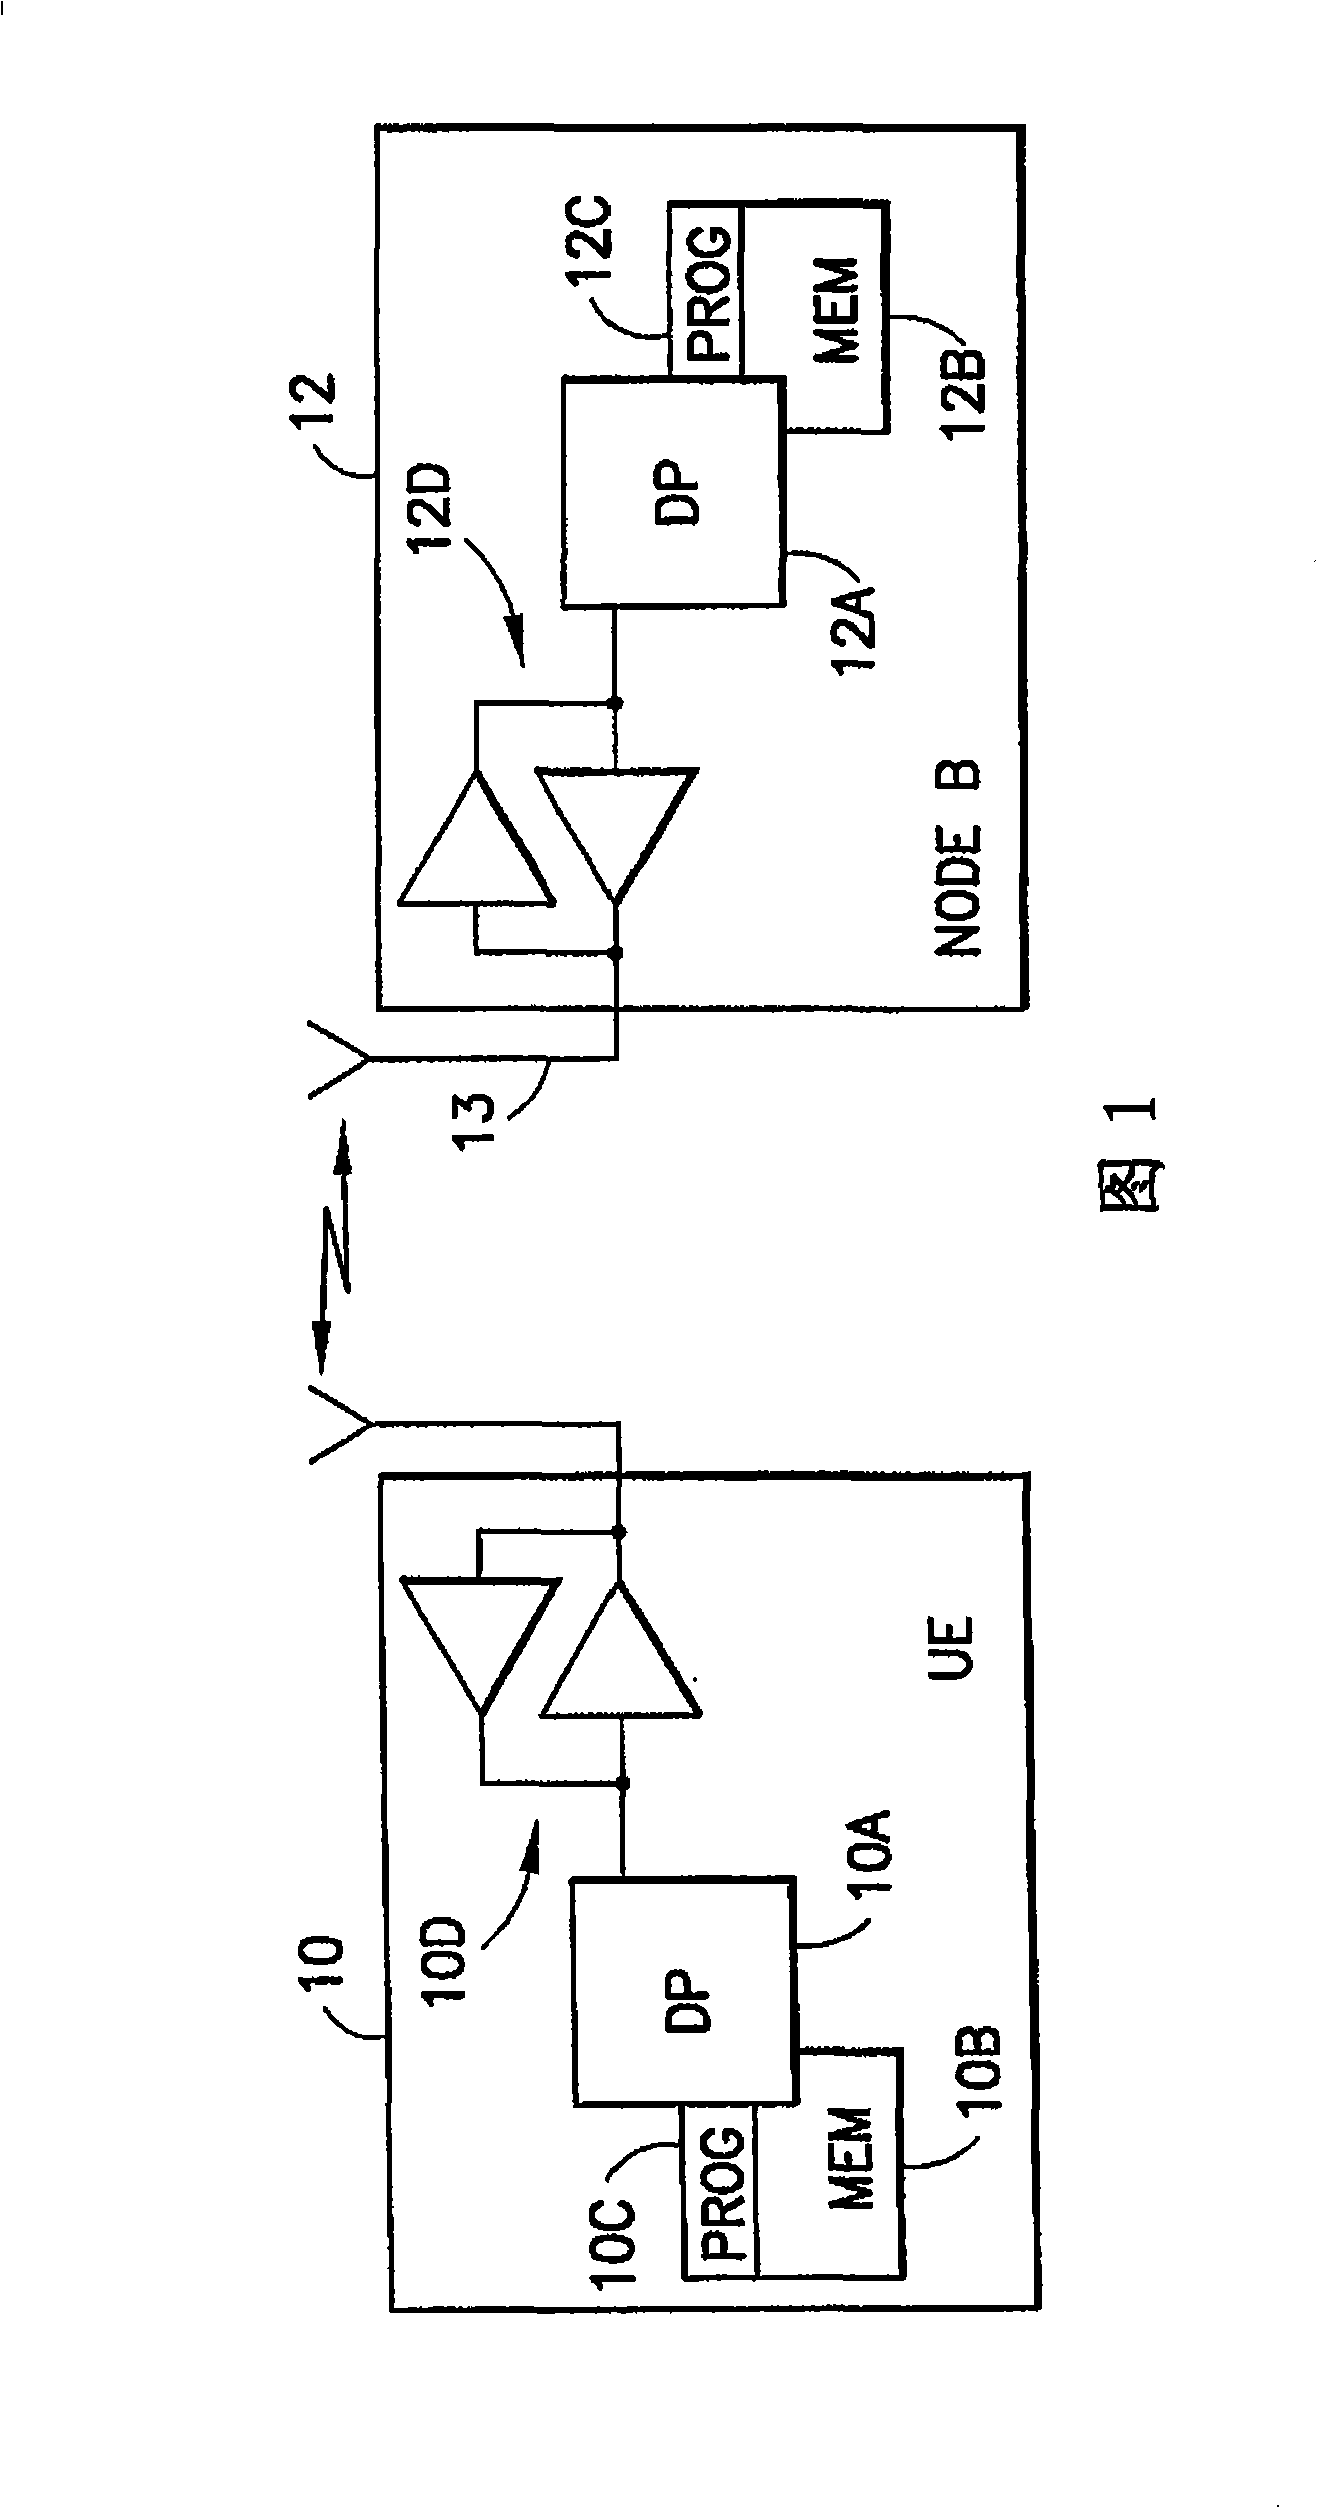 Apparatus, method and computer program product providing common pilot channel for soft frequency reuse